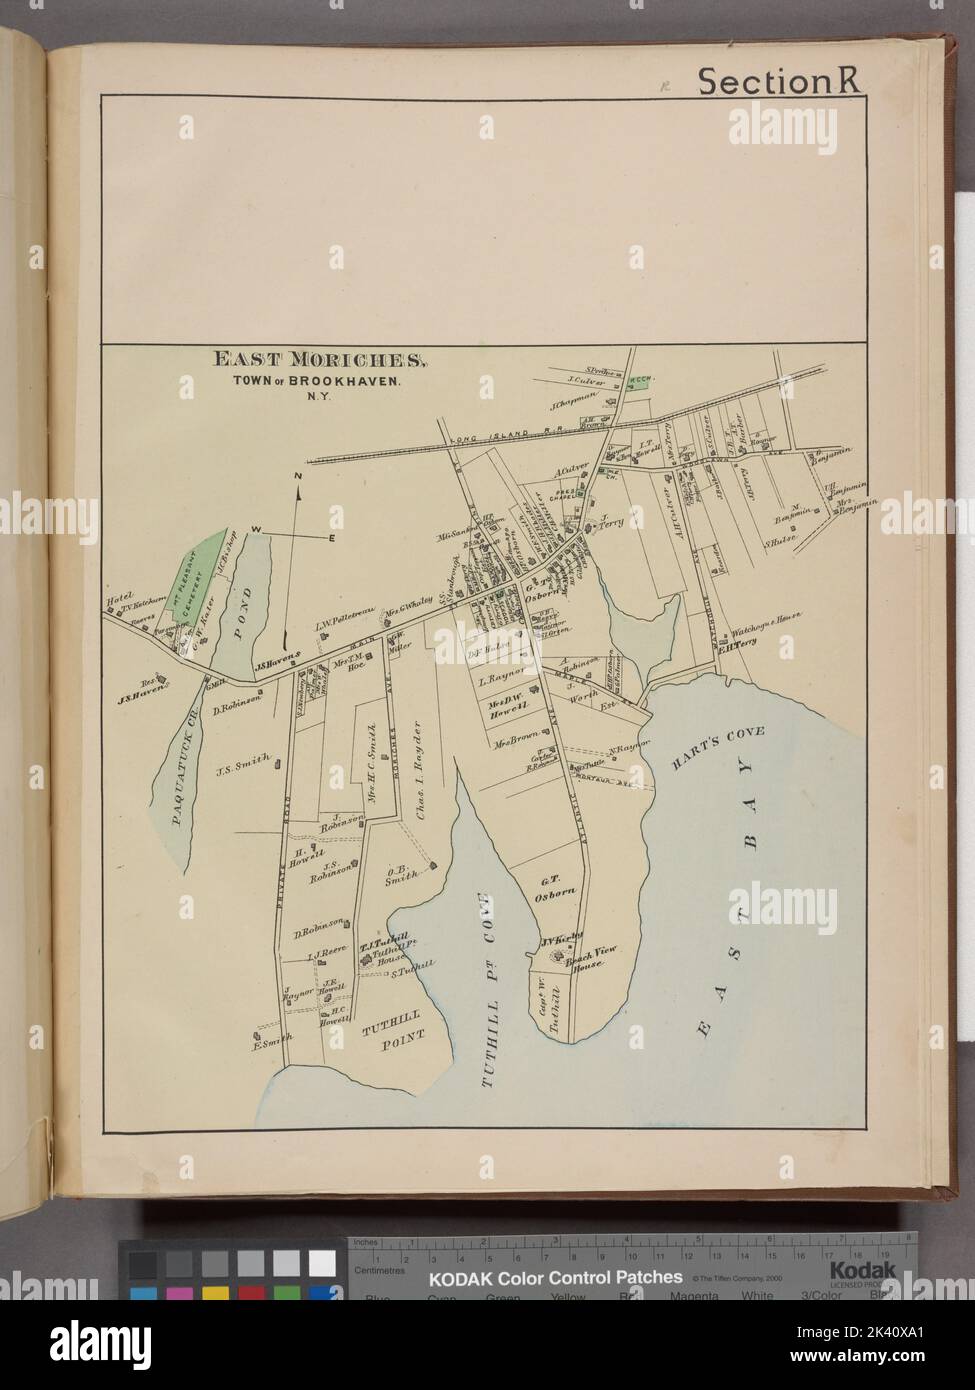 East Moriches. Village Cartographic. Atlases, Maps. 1888. Lionel Pincus and Princess Firyal Map Division. Atlases , New York (State) , Suffolk County Stock Photo